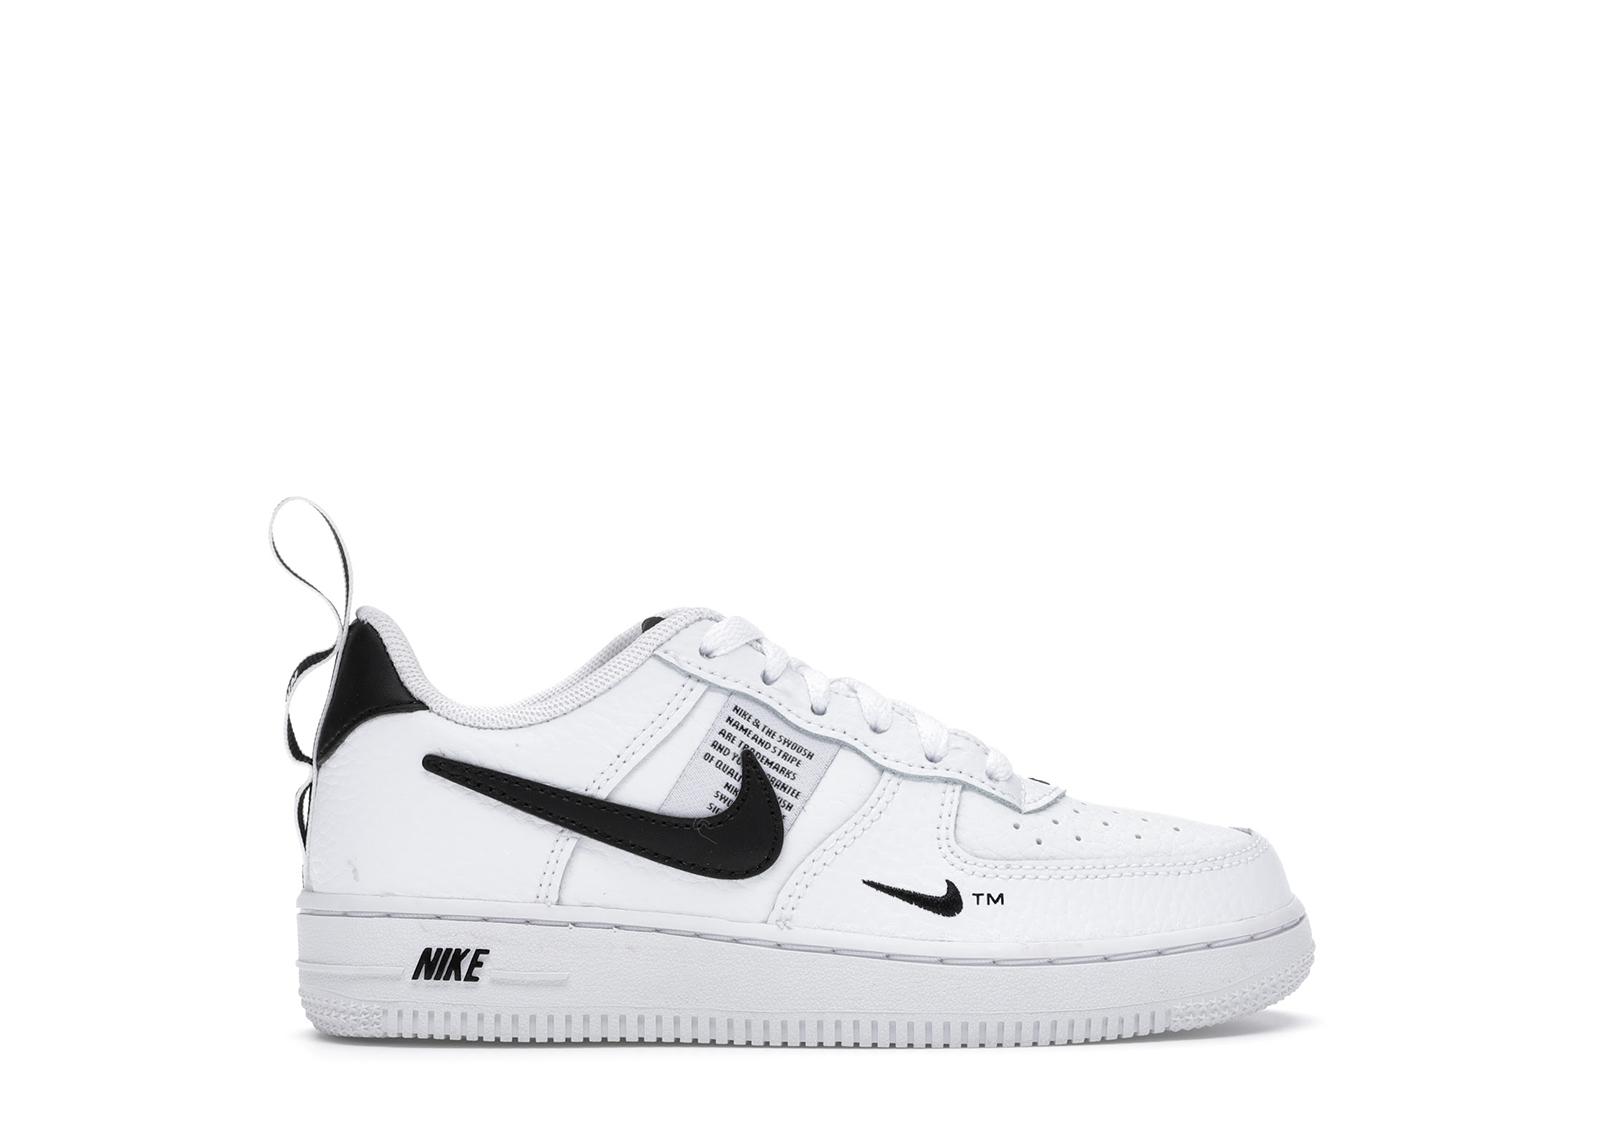 air force one low utility black white